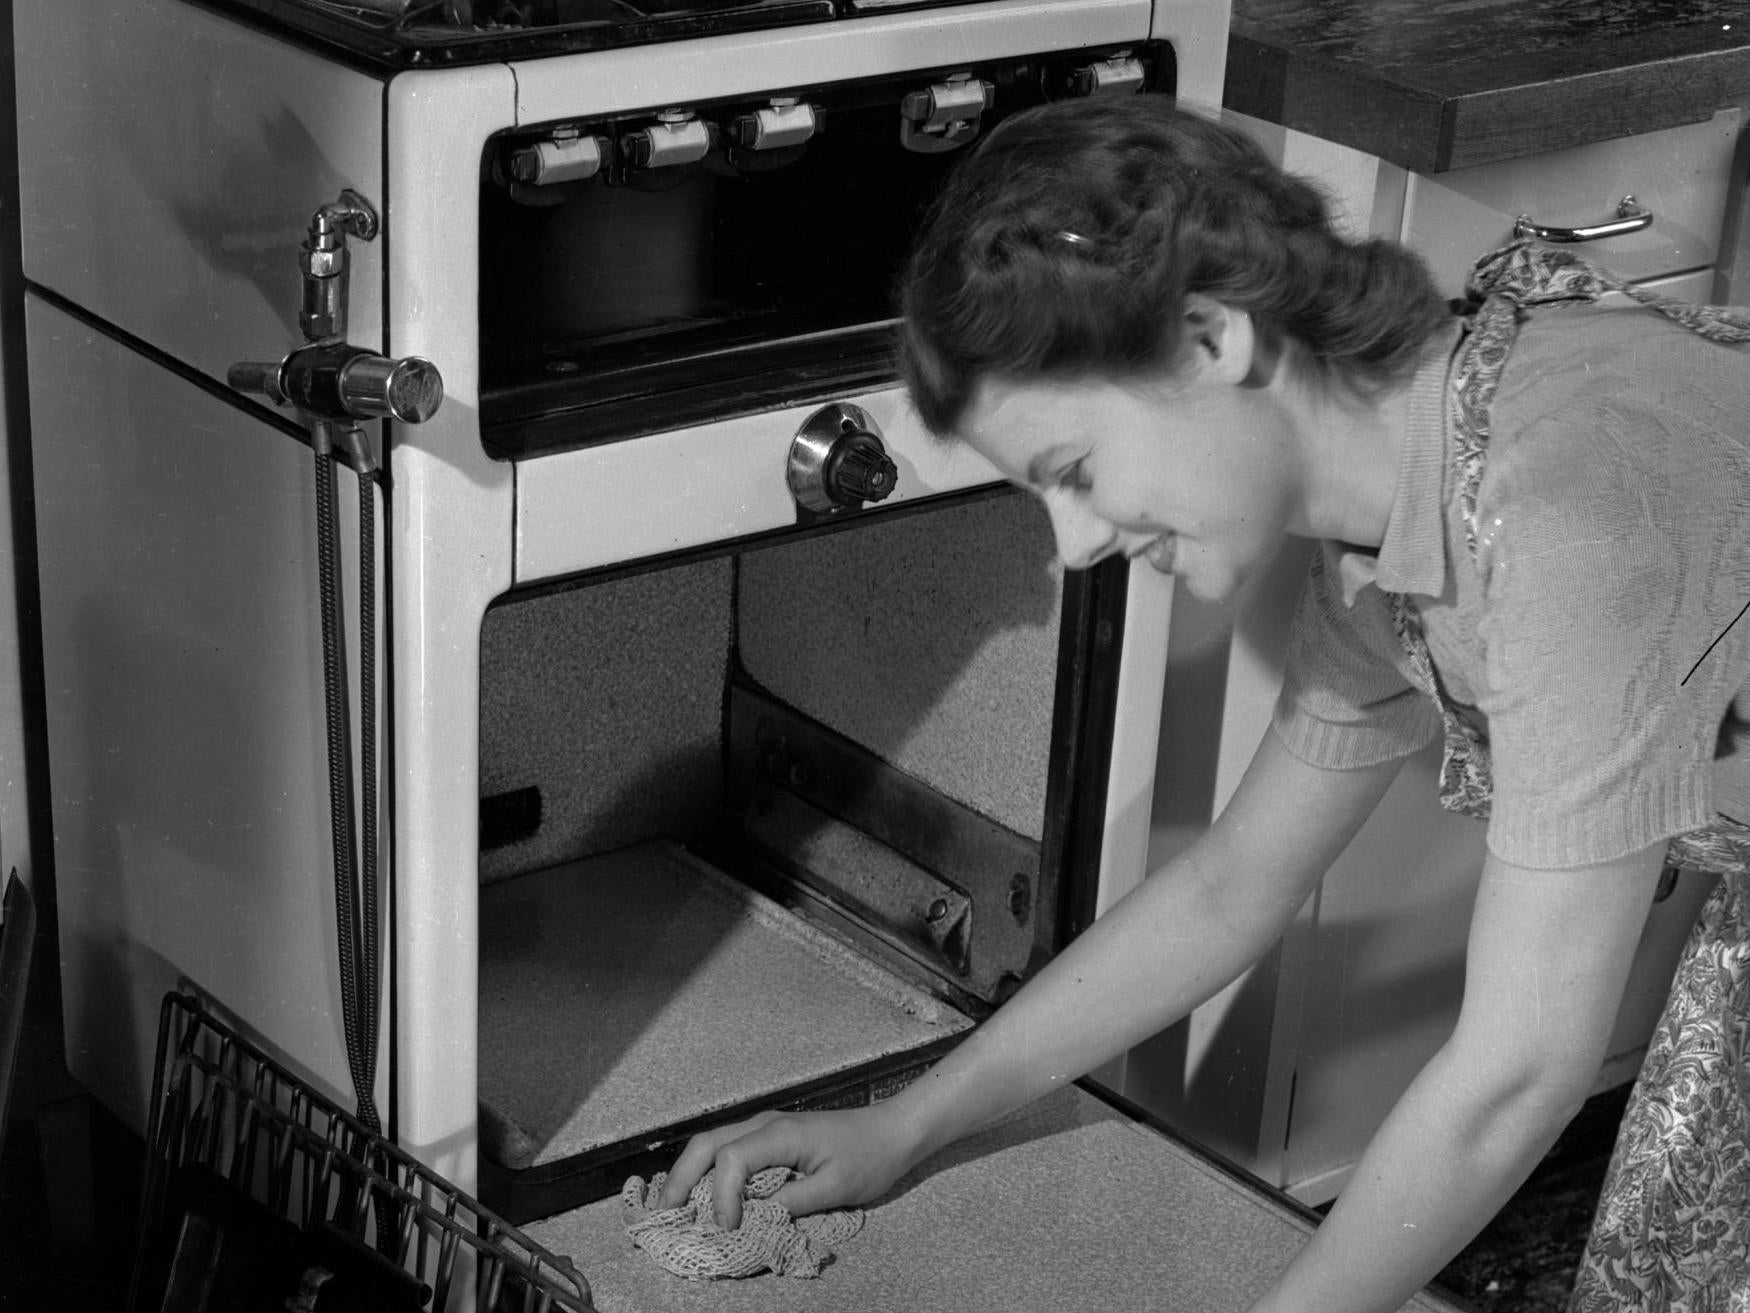 British people say previous generations had more time for household chores